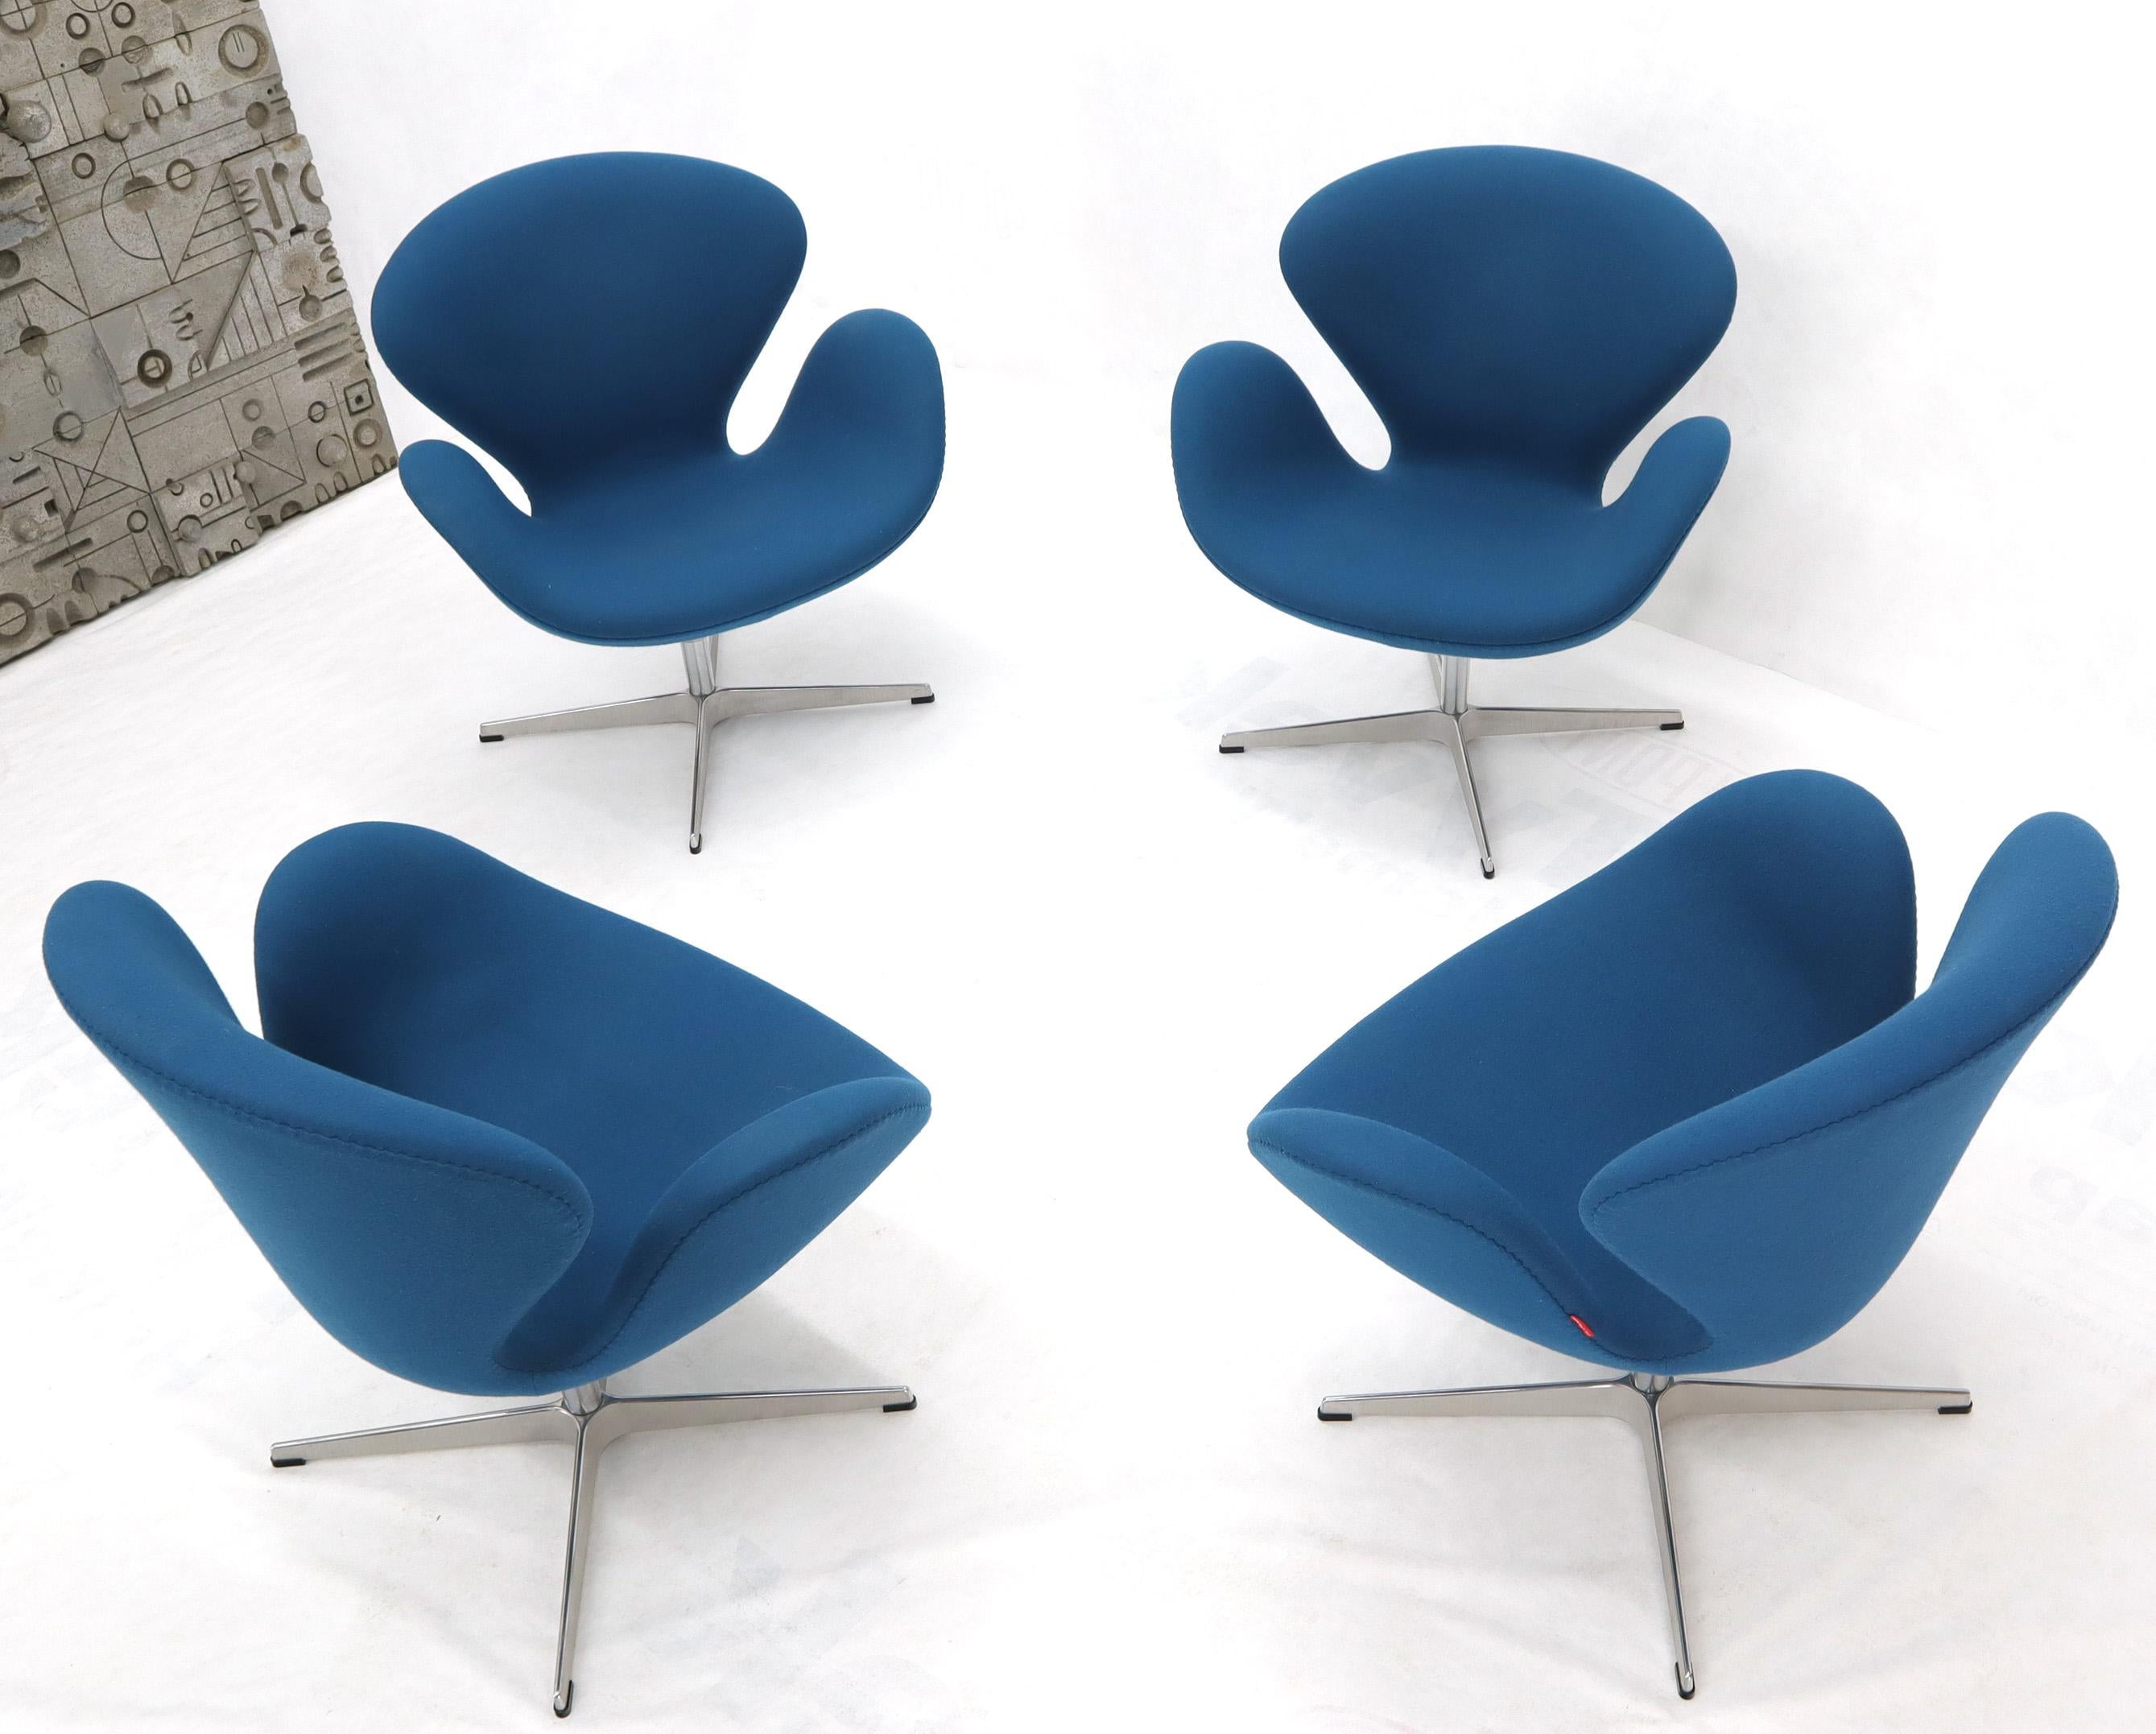 Set of 4 Mid-Century Modern thick boiled wool upholstery Swan chairs.